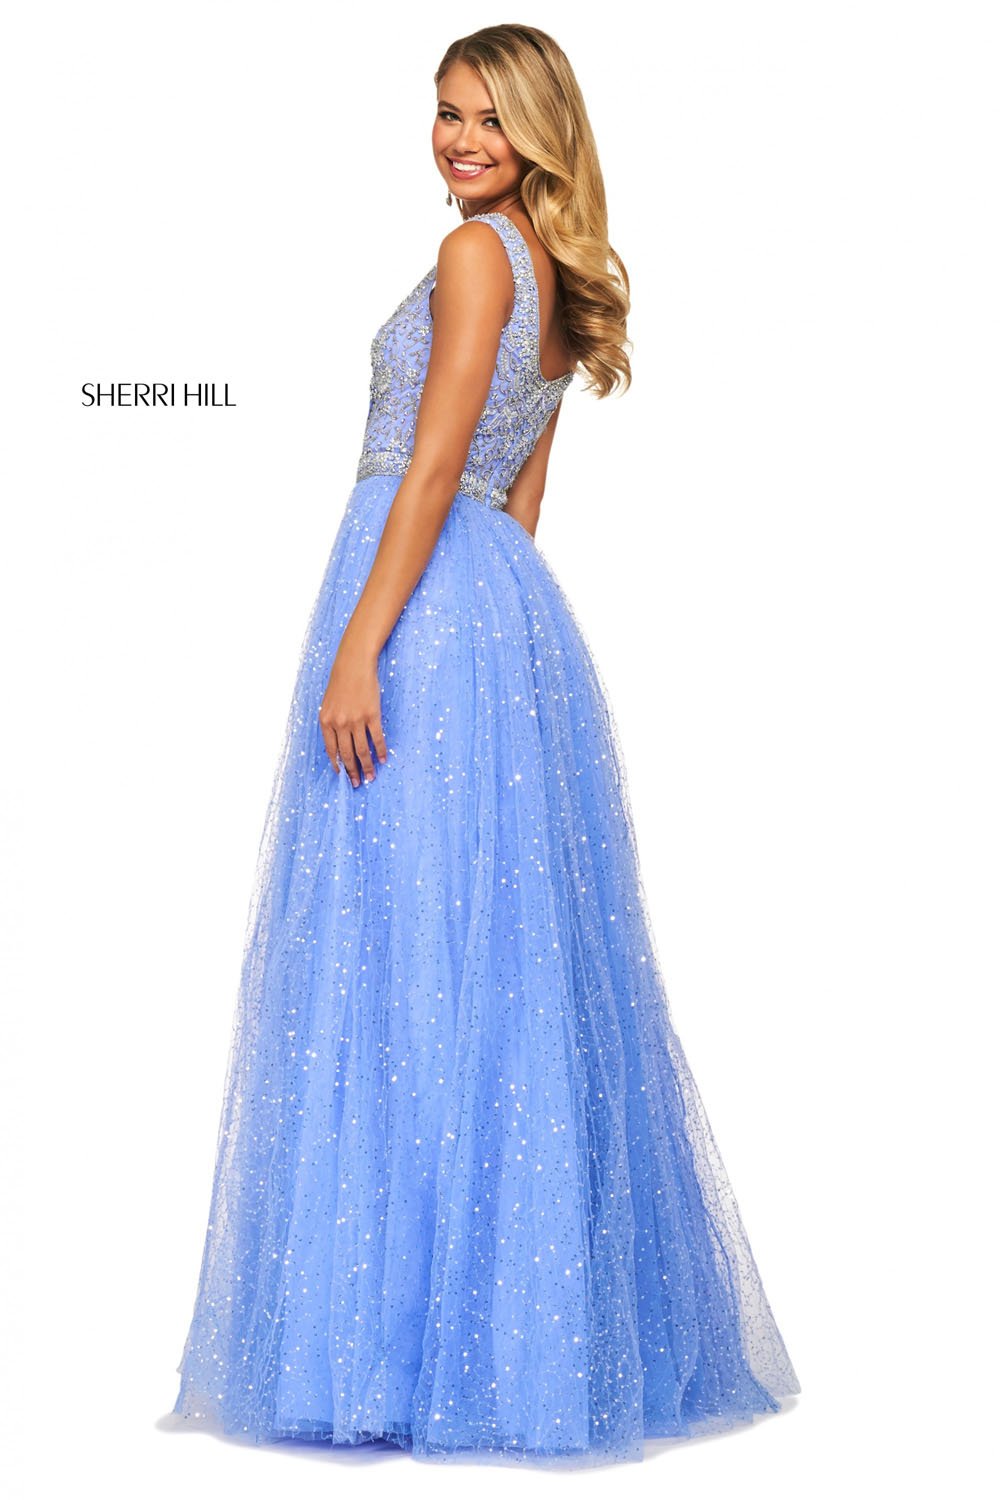 Sherri Hill 53541 dress images in these colors: Fuchsia, Periwinkle Silver, Light Blue, Ivory Silver, Red, Black.